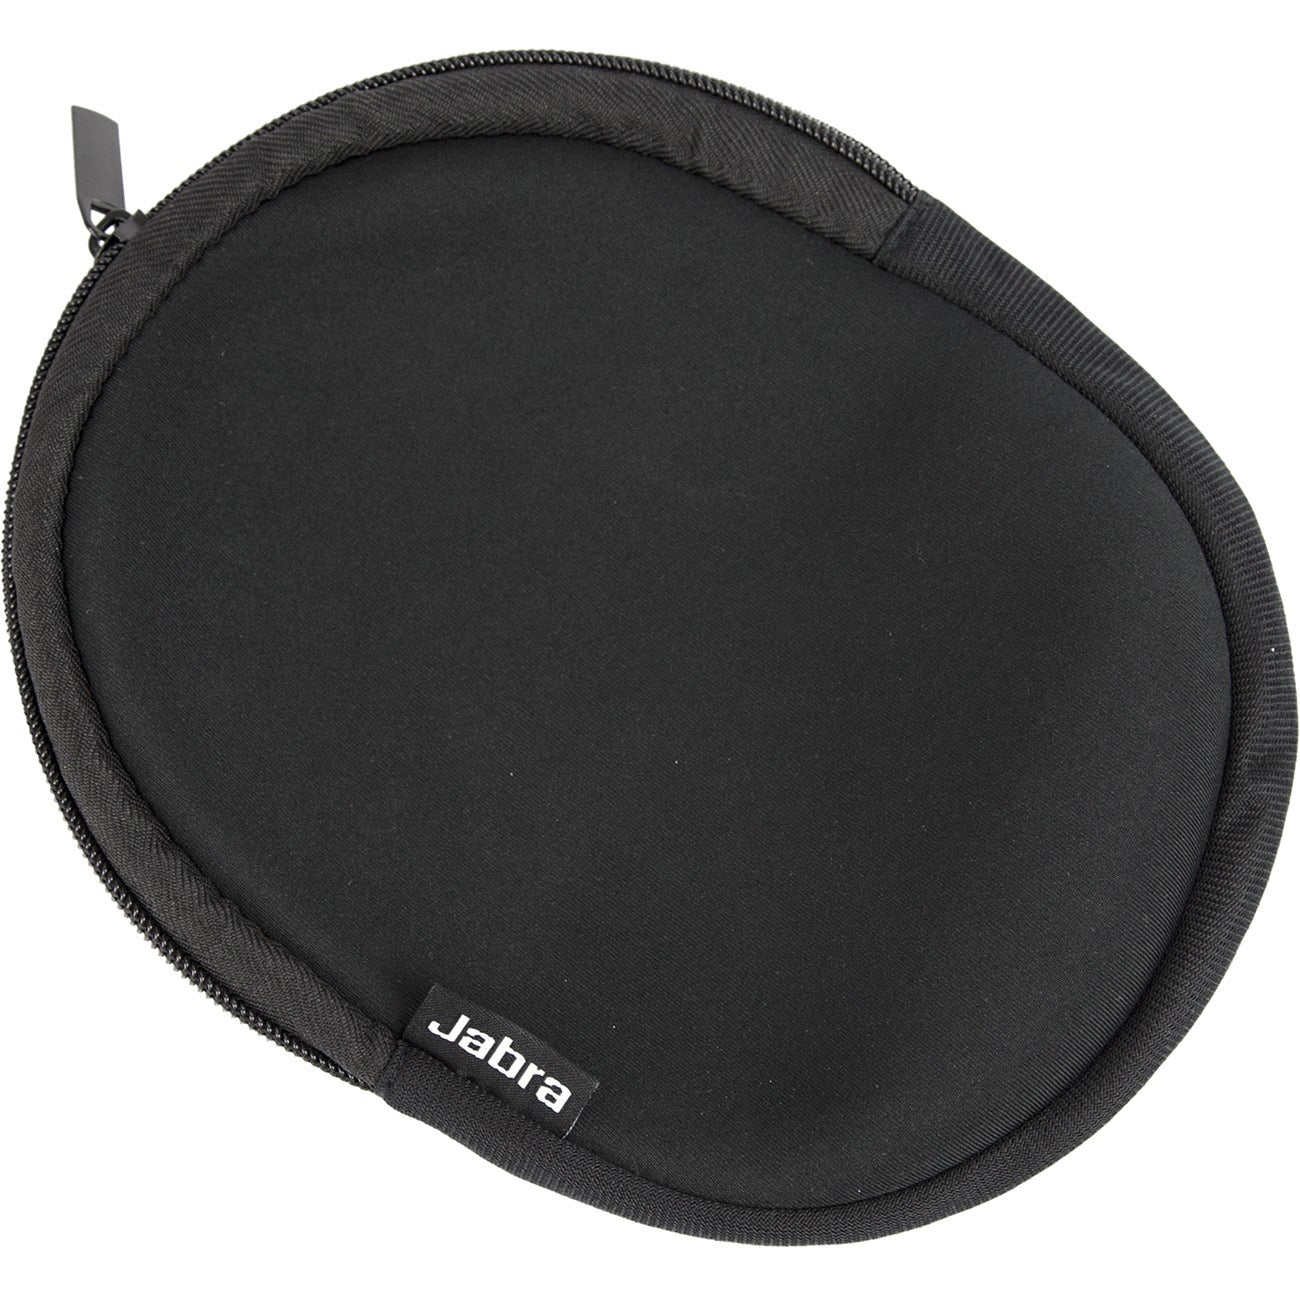 Jabra Carrying Case (Pouch) Headset - 14101-47